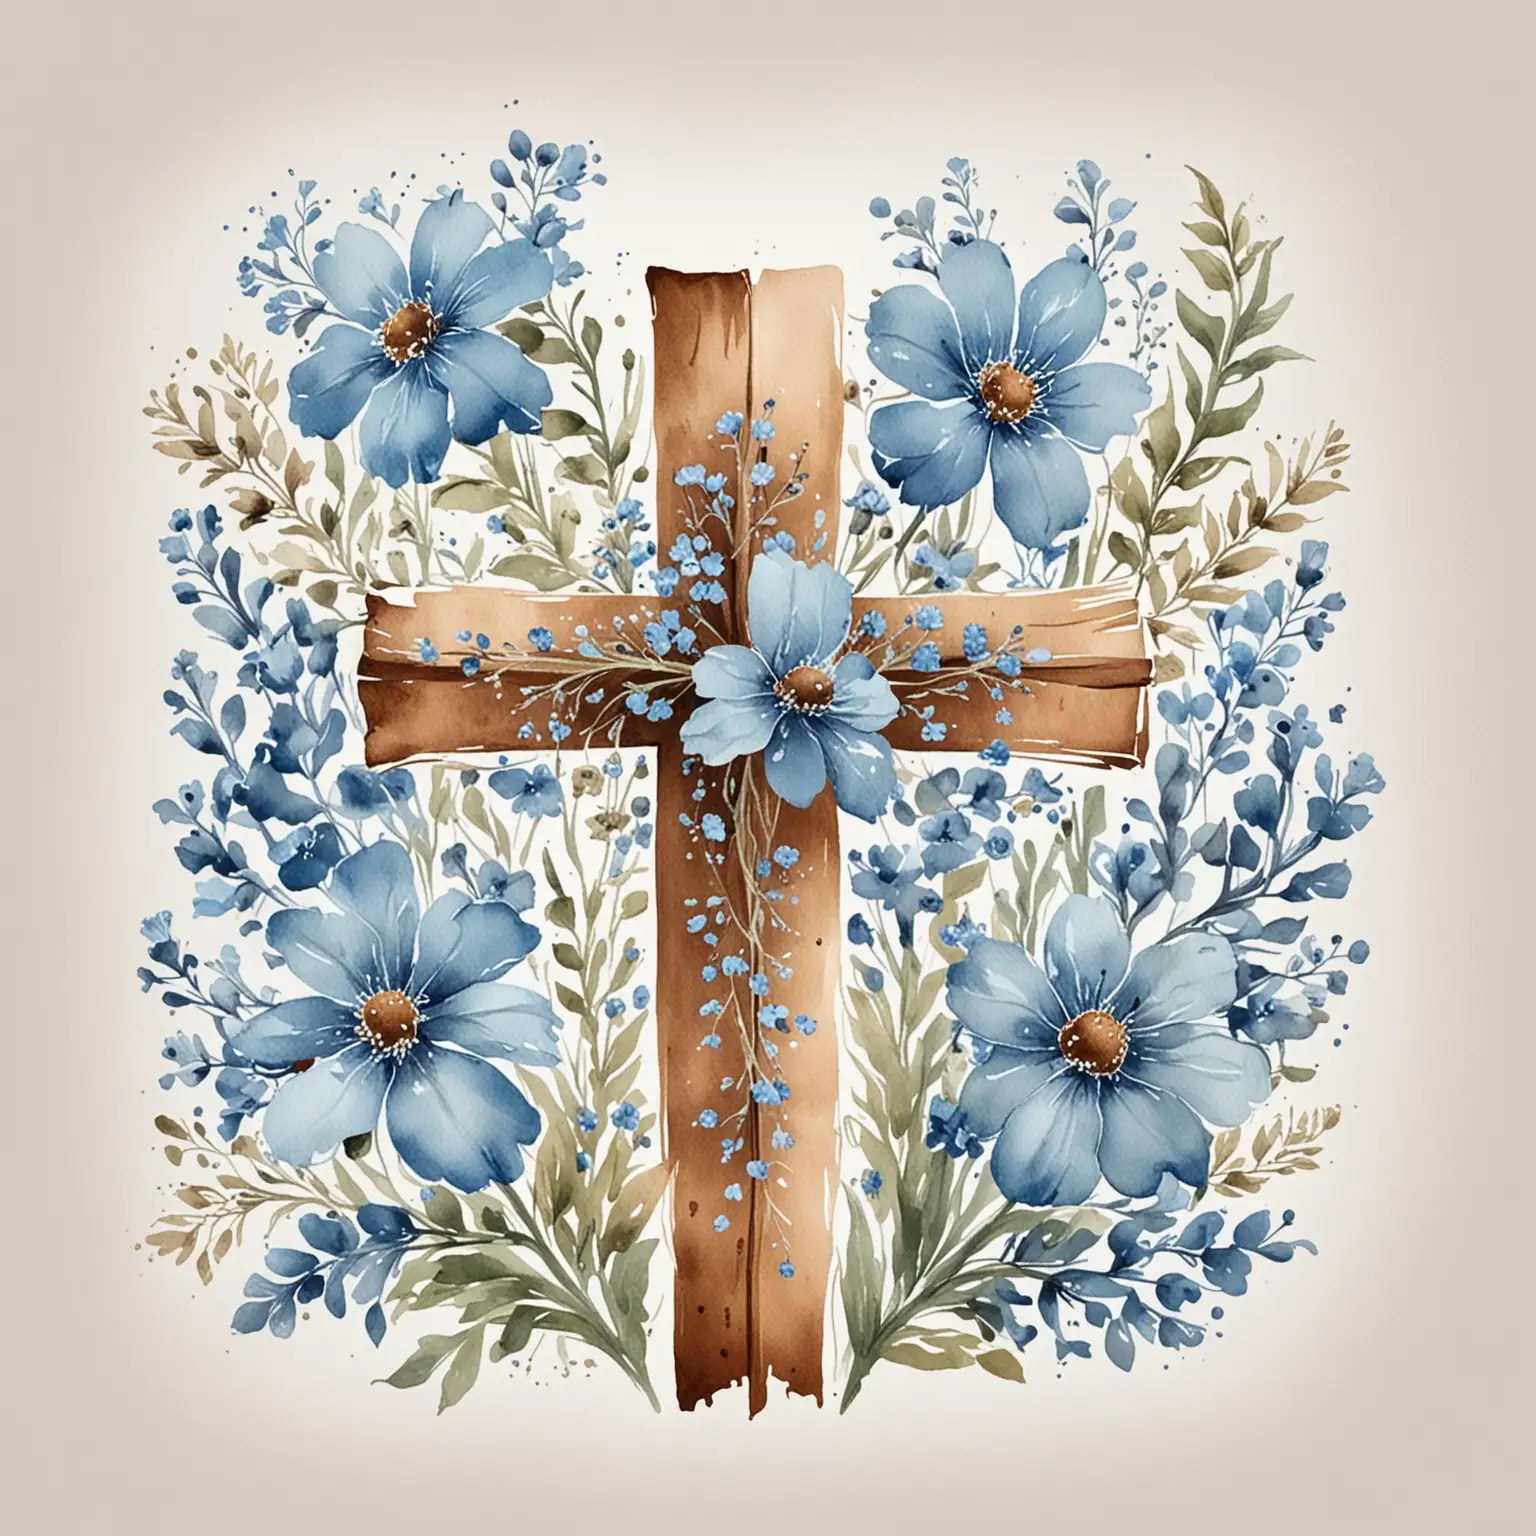 Watercolor Brown Cross with Light Blue Flowers on White Background